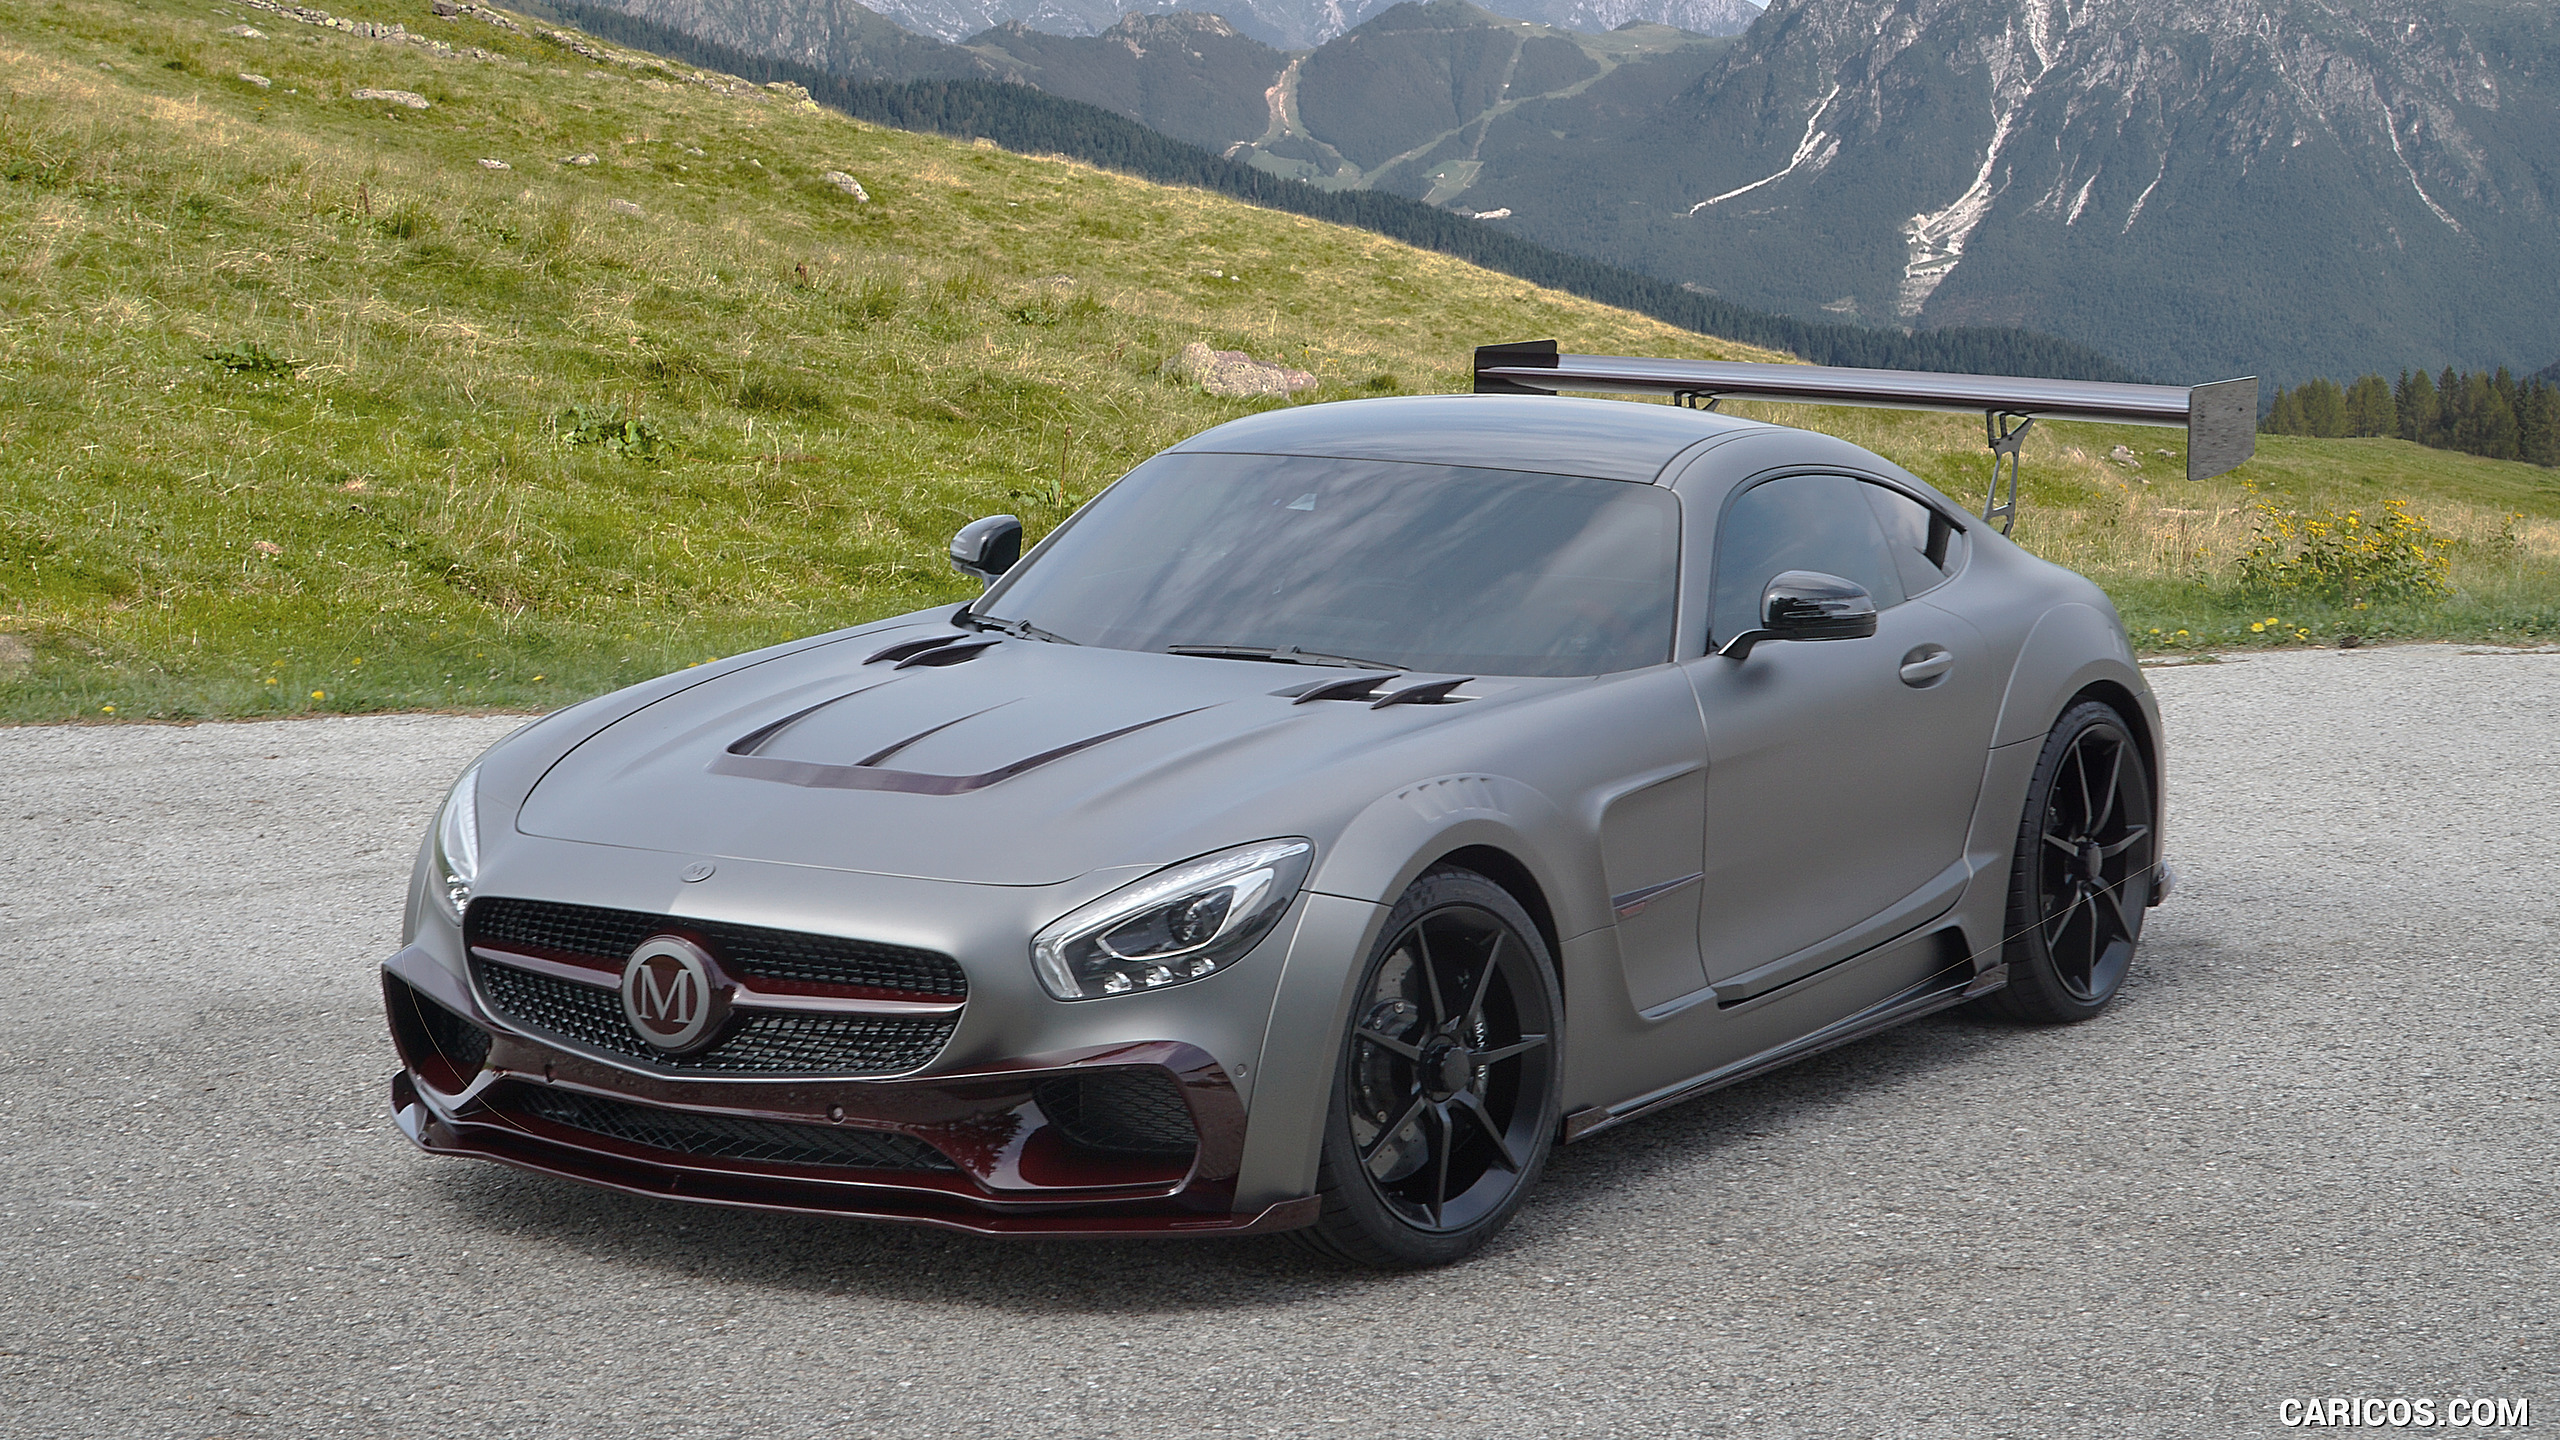 2016 MANSORY Mercedes-AMG GT S [One-Off] - Front Three-Quarter, #1 of 7